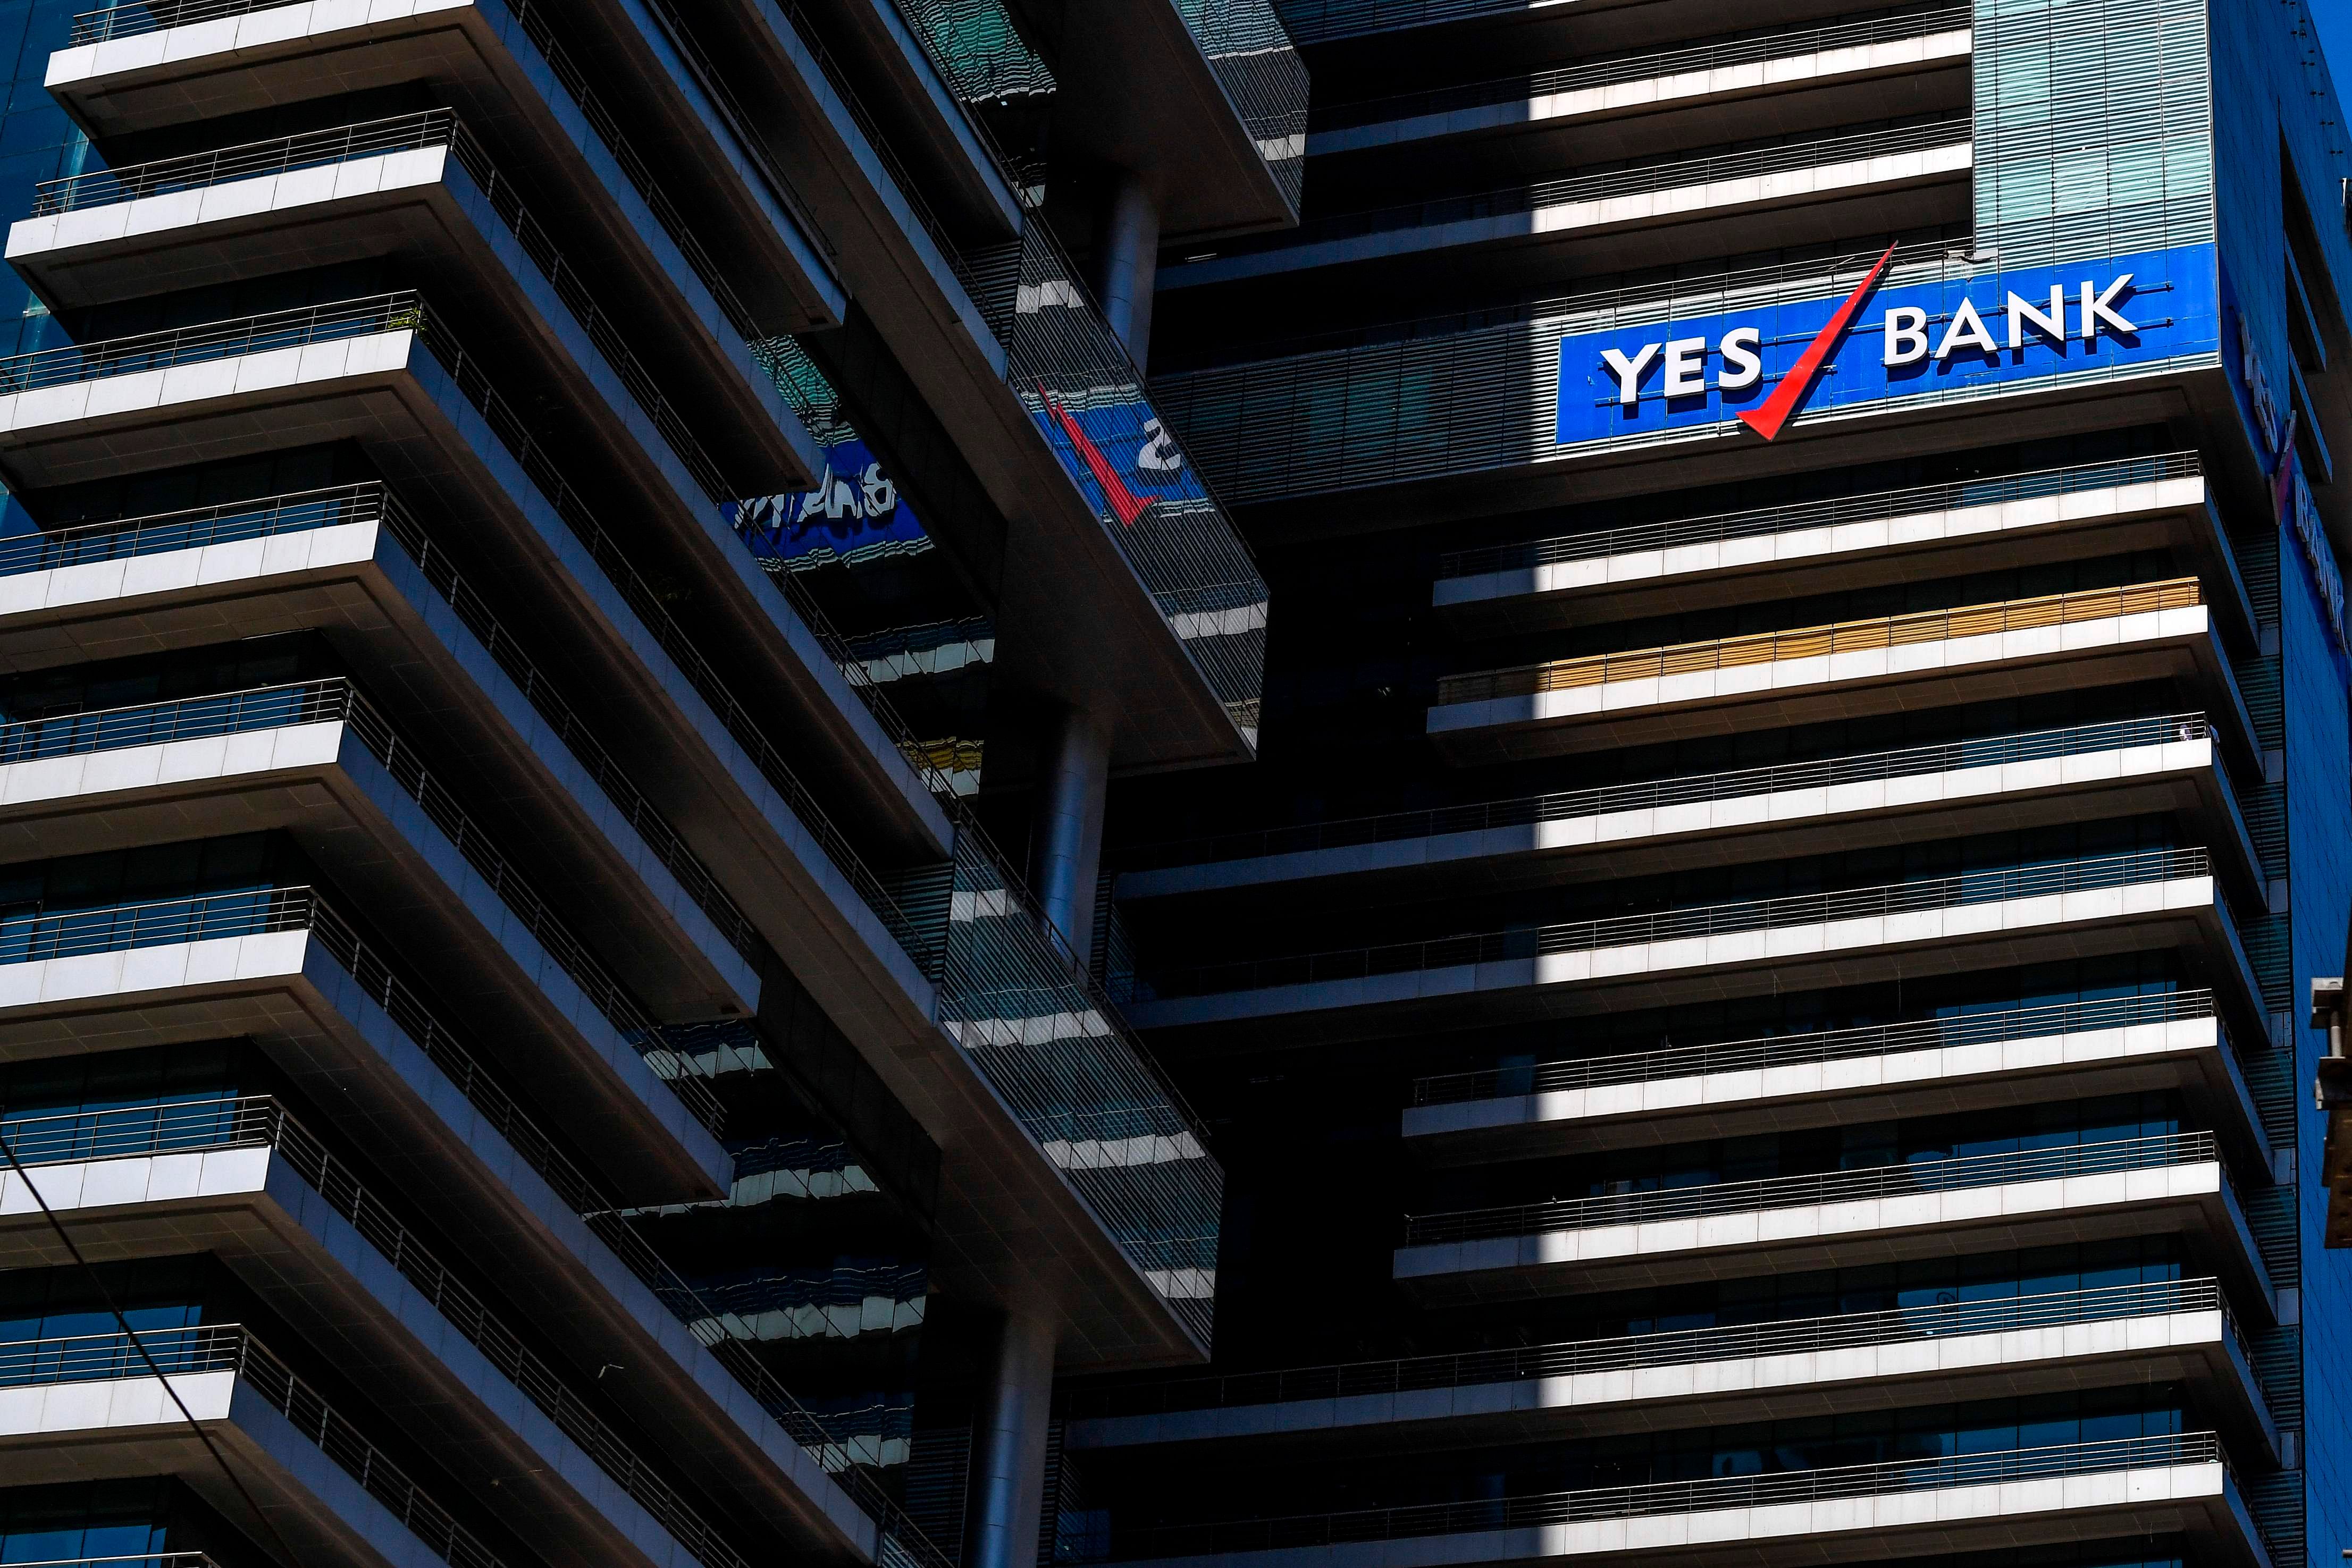 The headquarters of one of India's major private banks, Yes Bank, is pictured in Mumbai. (Credit: AFP)